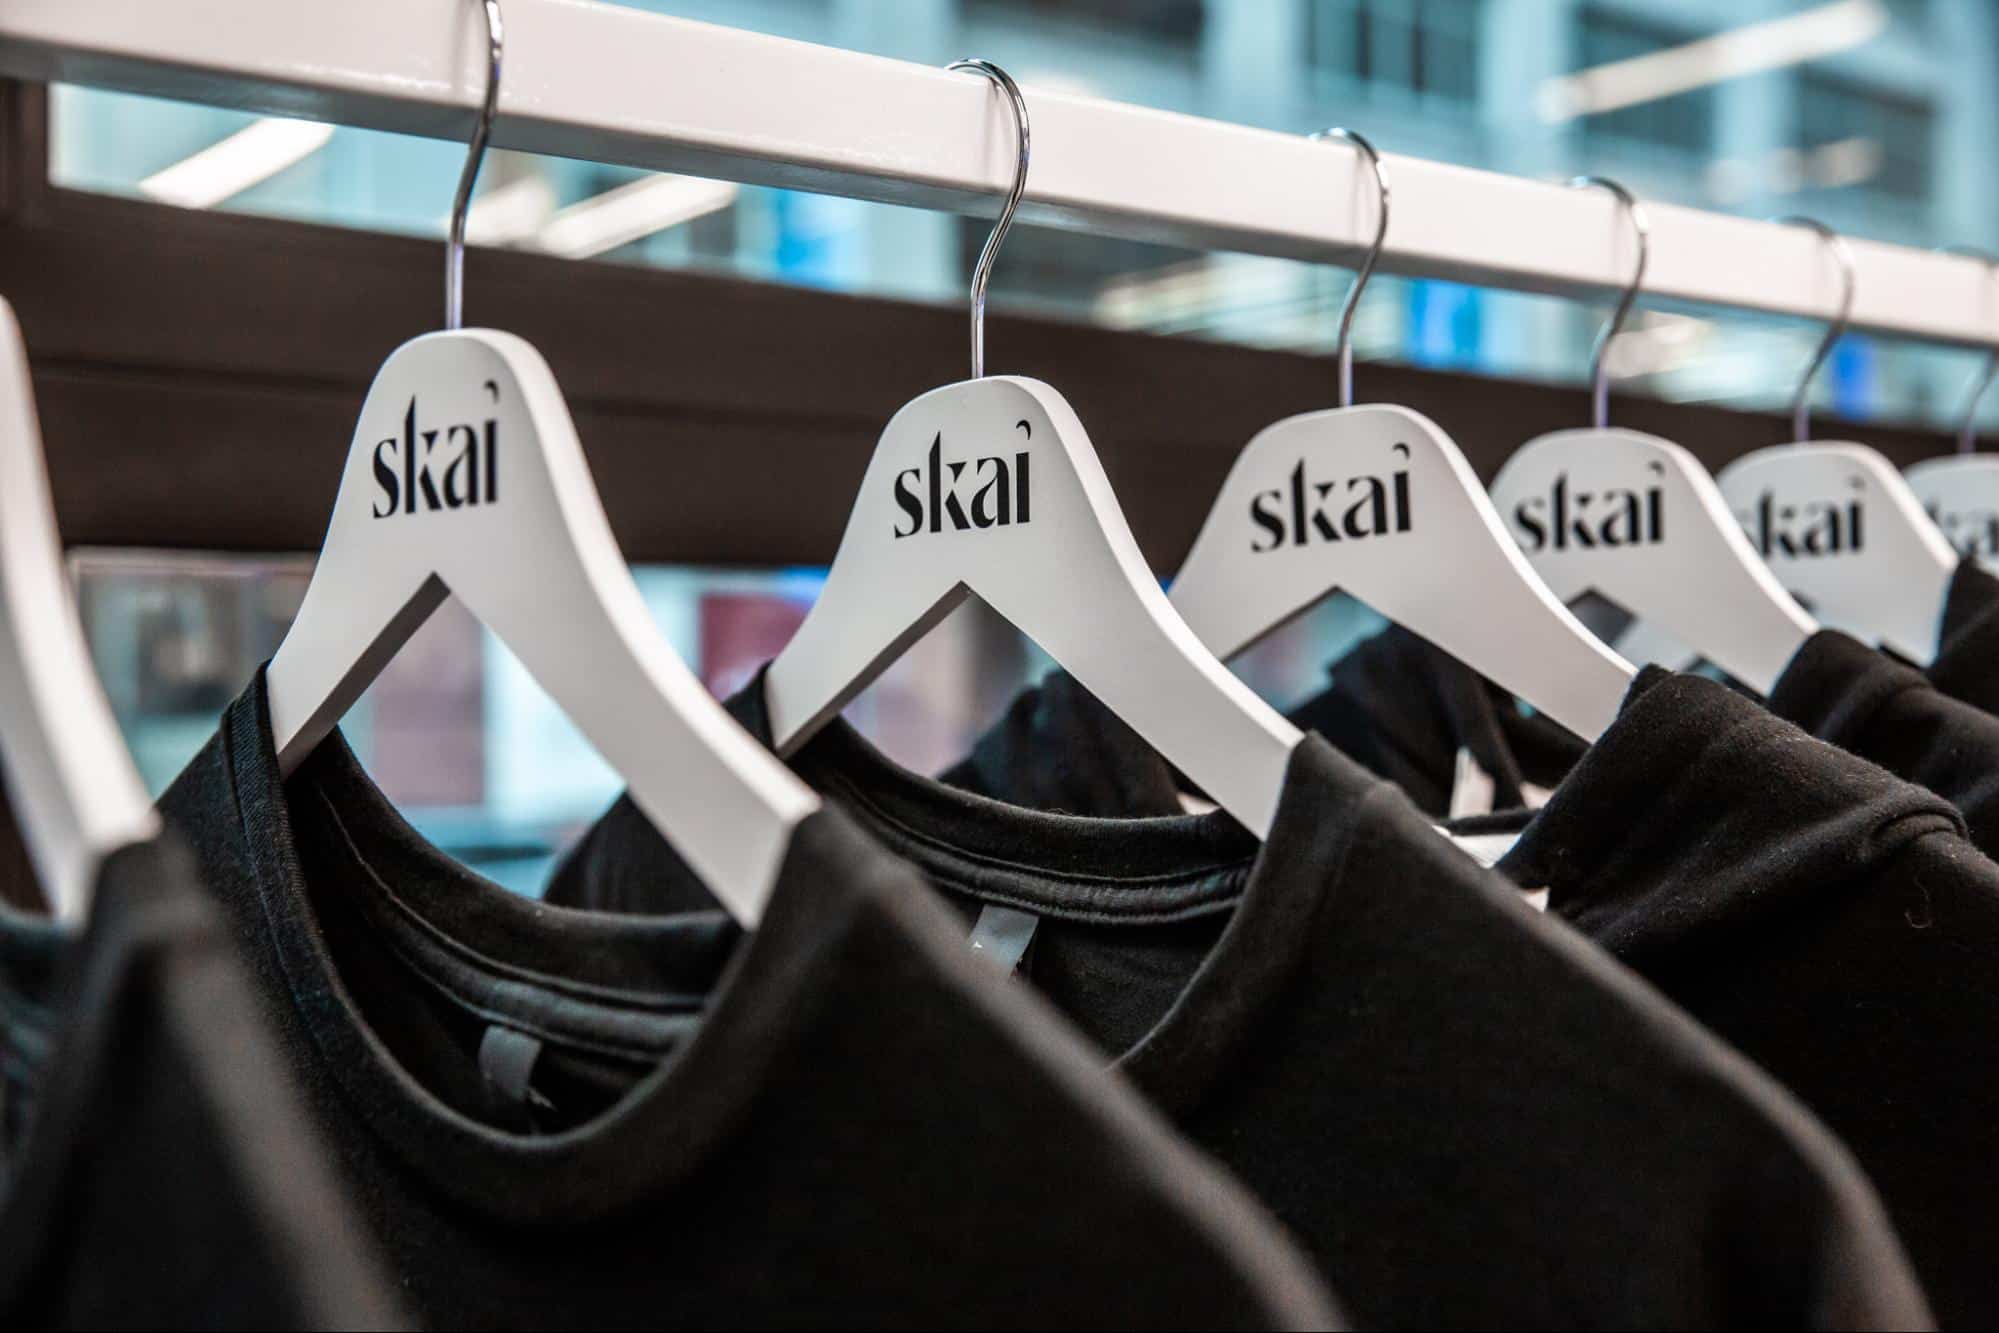 Skai merchandise and branded hangers on display at ShopAble conference.